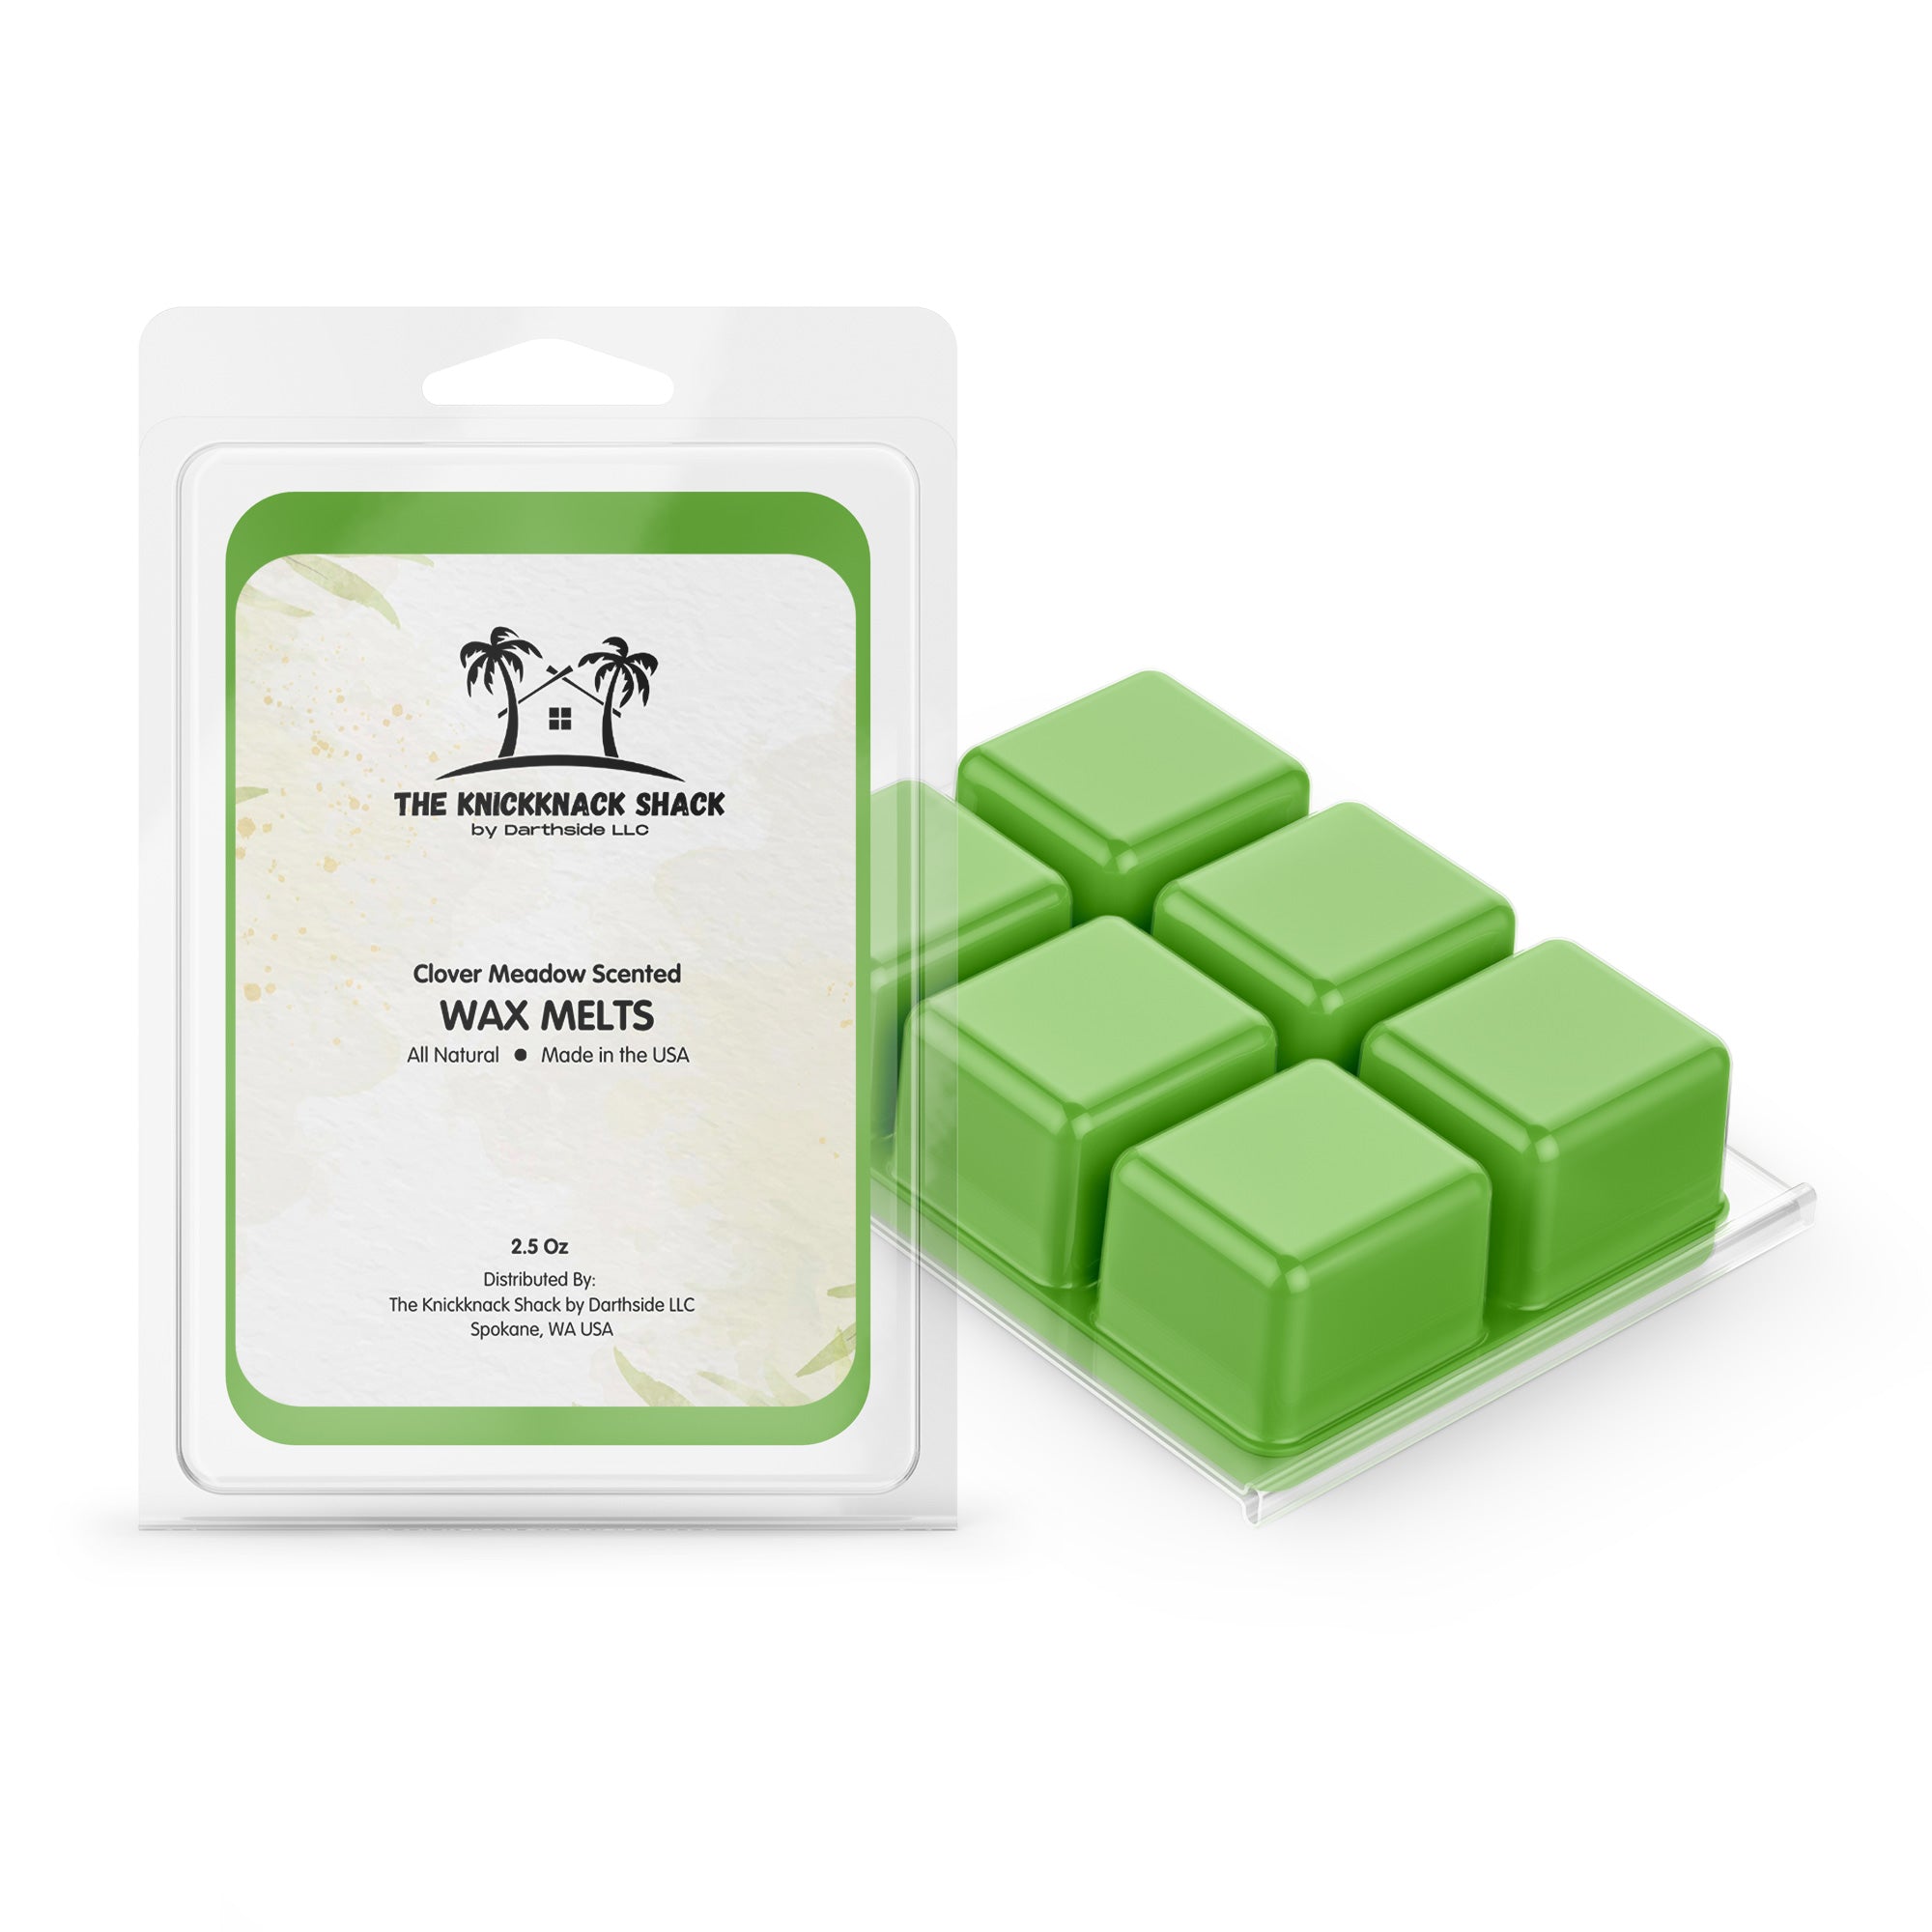 Clover Meadow Scented Wax Melts